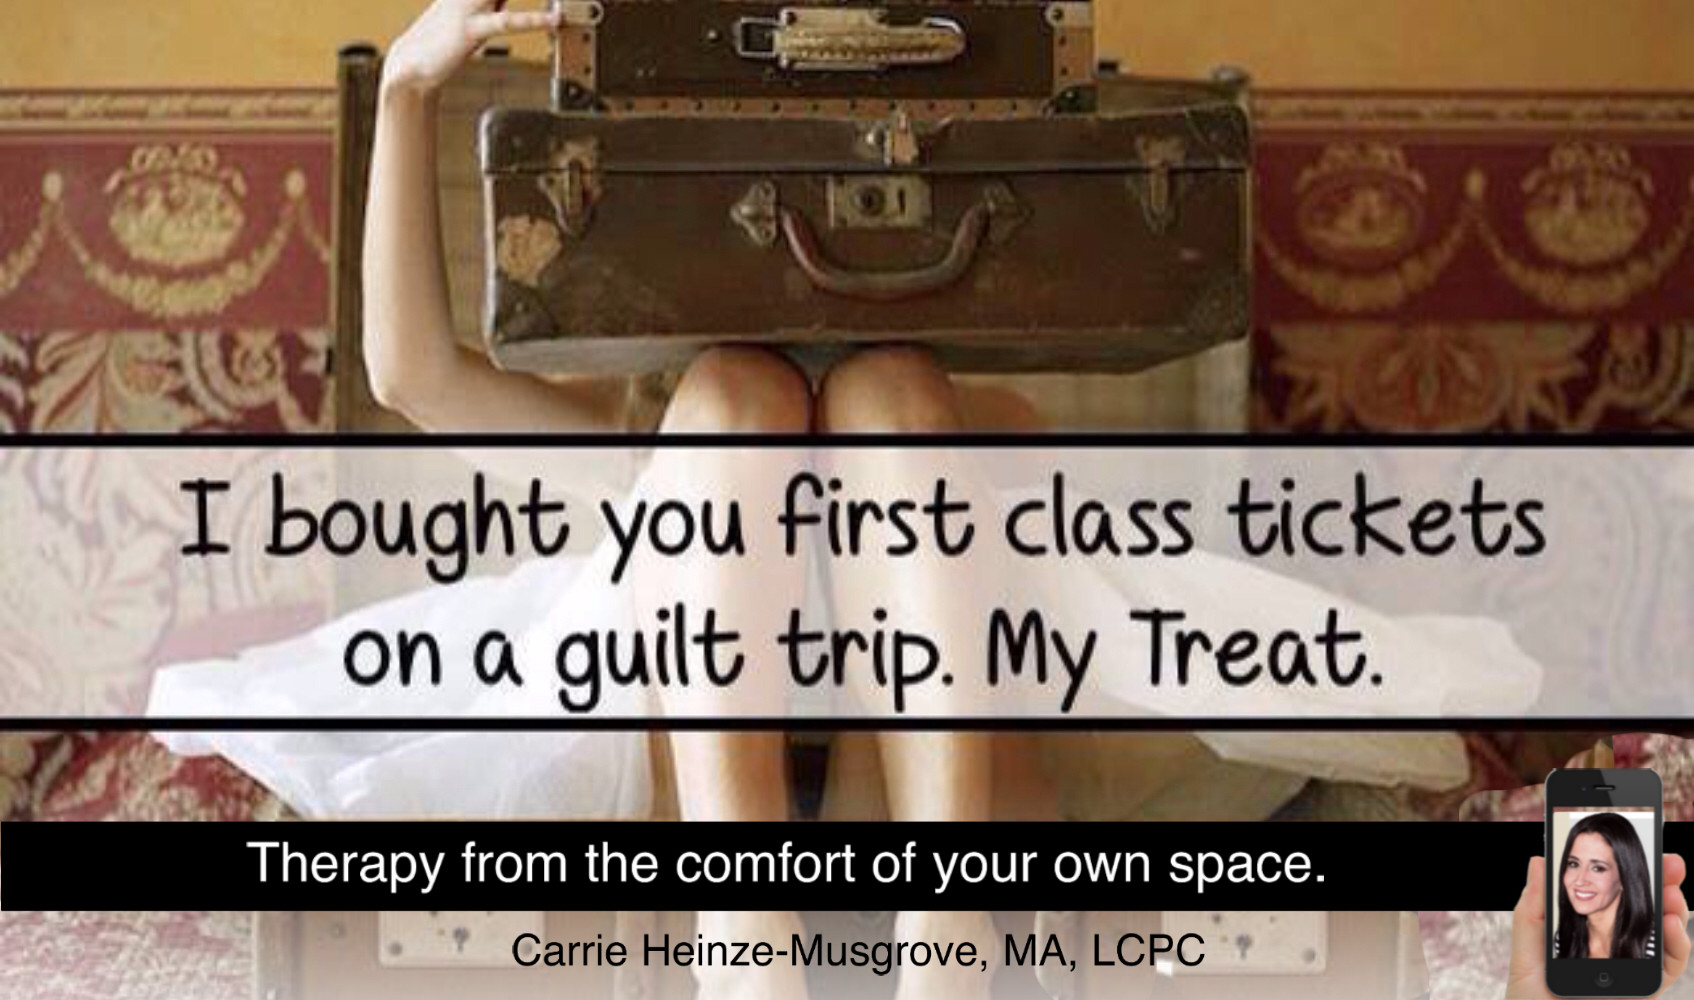 Guilt trips are manipulation.